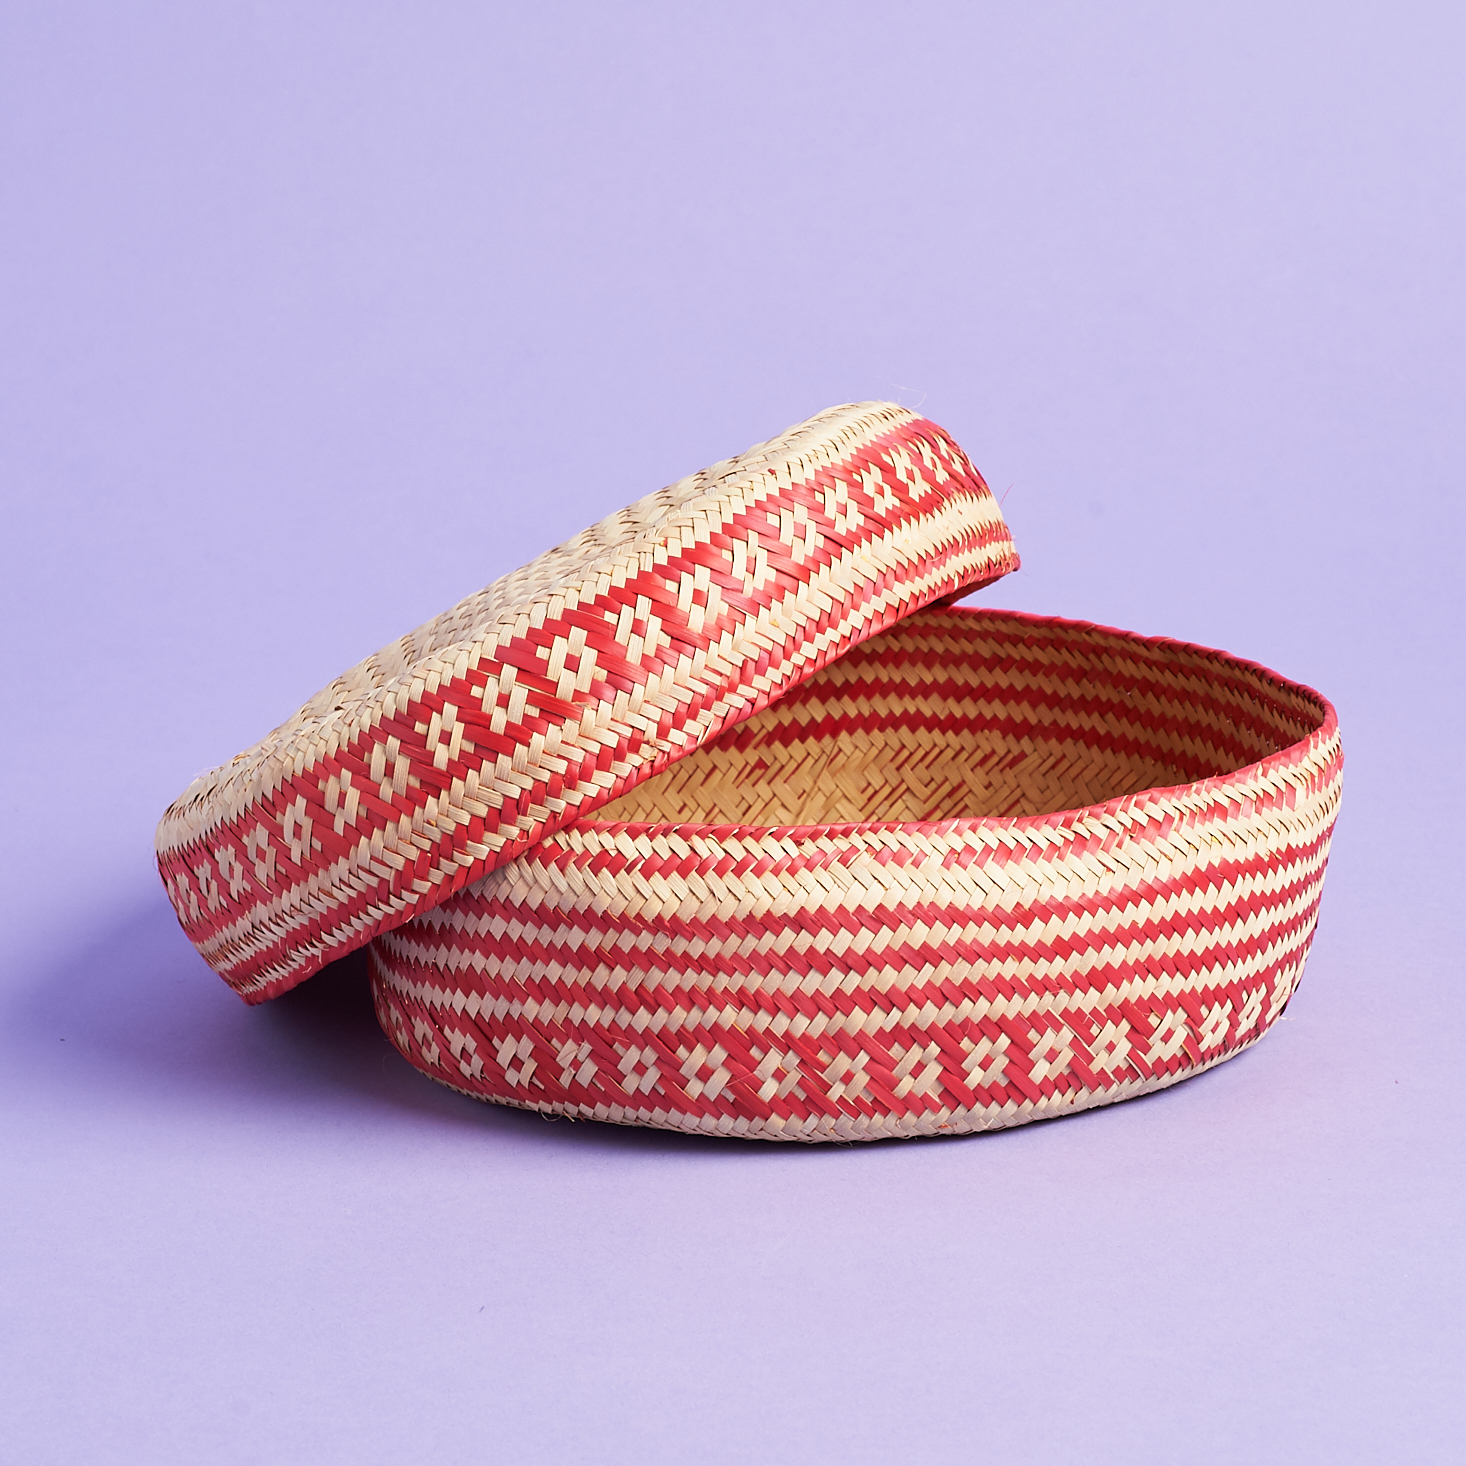 red and natural colored woven basket